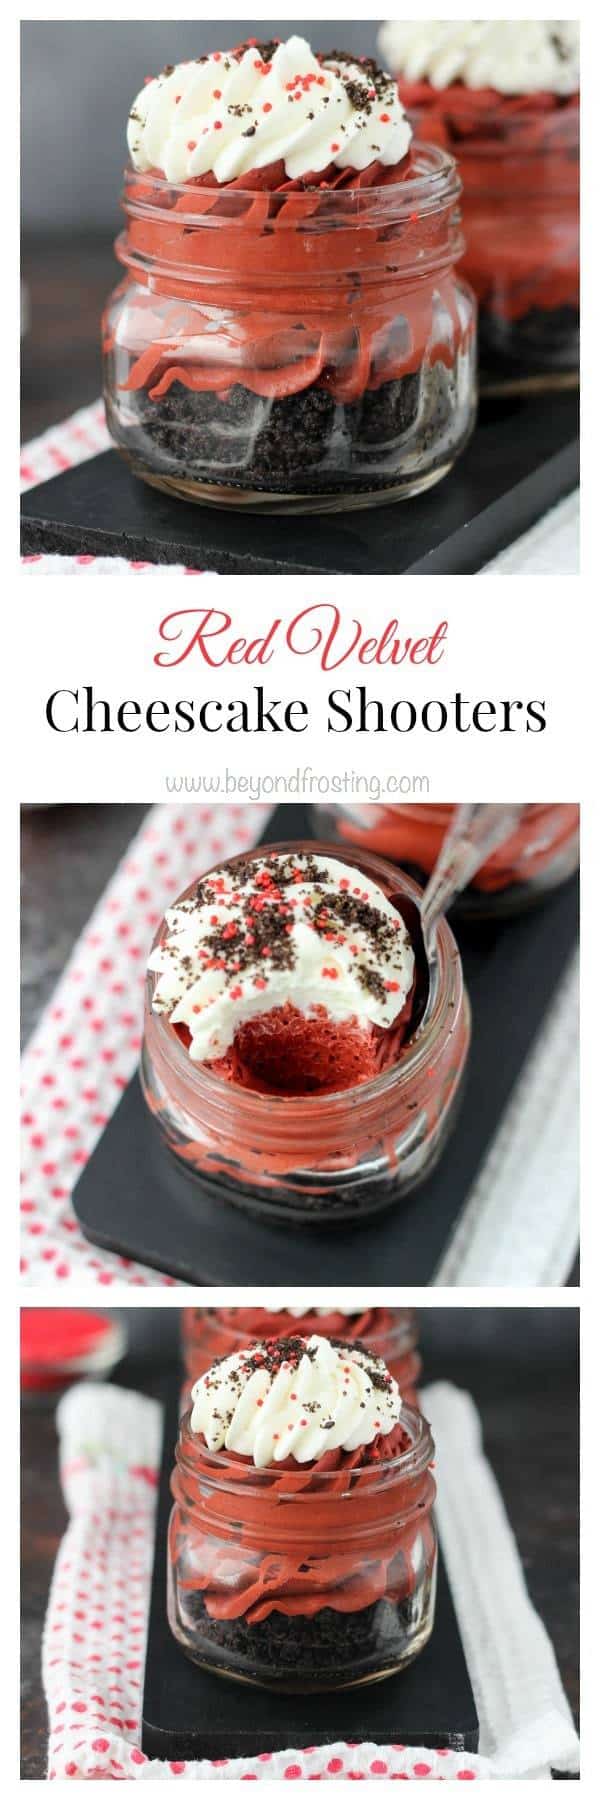 These Red Velvet Cheesecake Shooters have just the right amount of chocolate flavor. On the bottom, you’ve got a nice thick layer of Oreo cookies. Next, you have a smooth, red velvet no-bake cheesecake filling and it’s topped with a hint of whipped cream